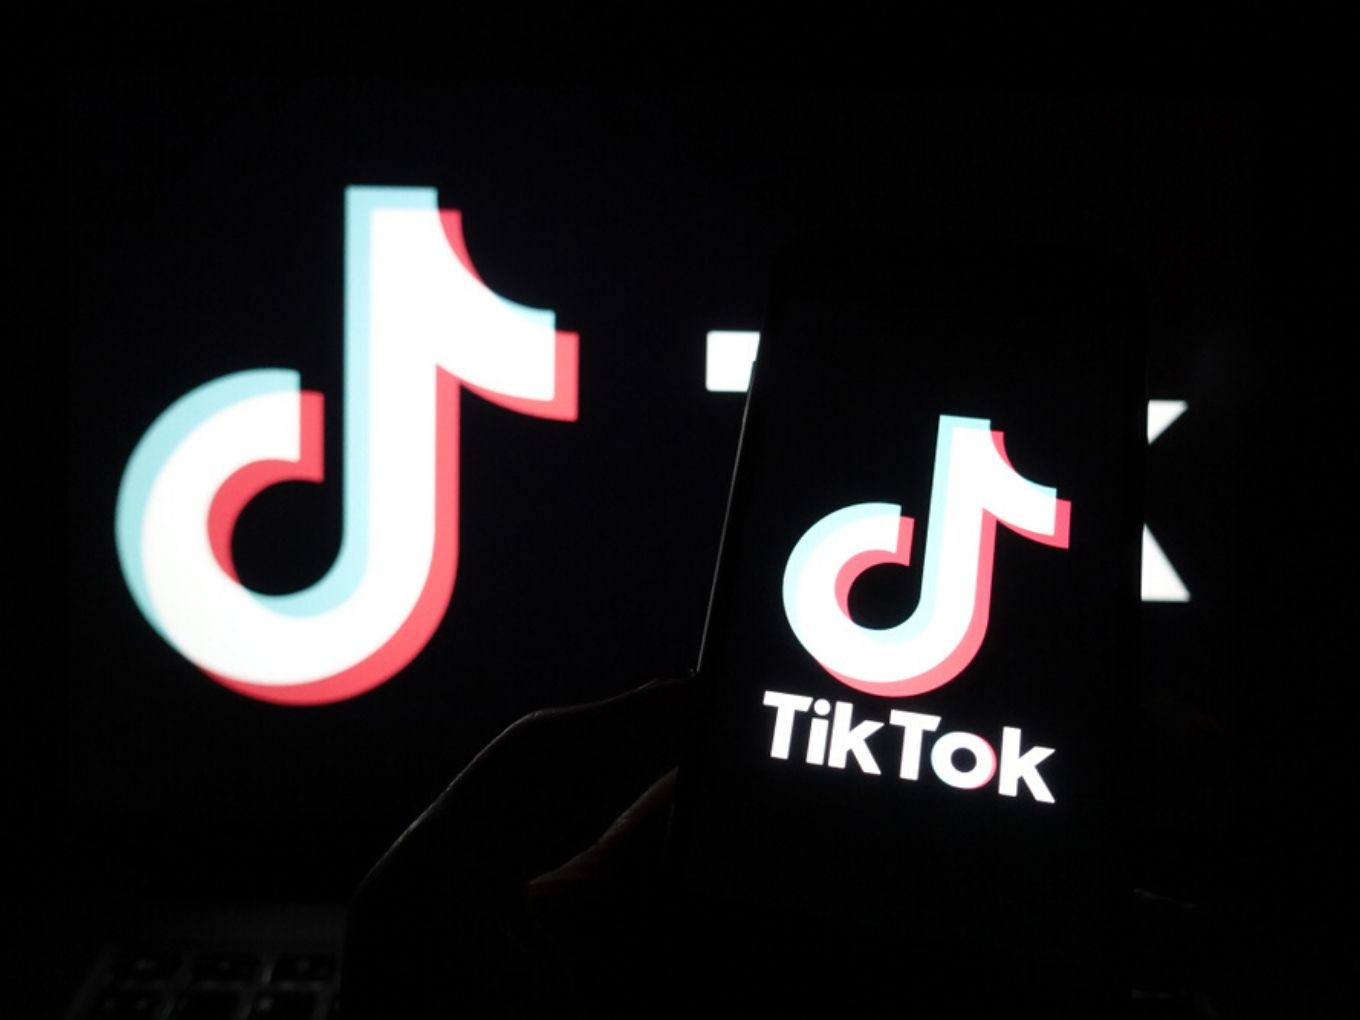 Teen’s Accidental Death While Using TikTok Turns Back Focus On User Safety